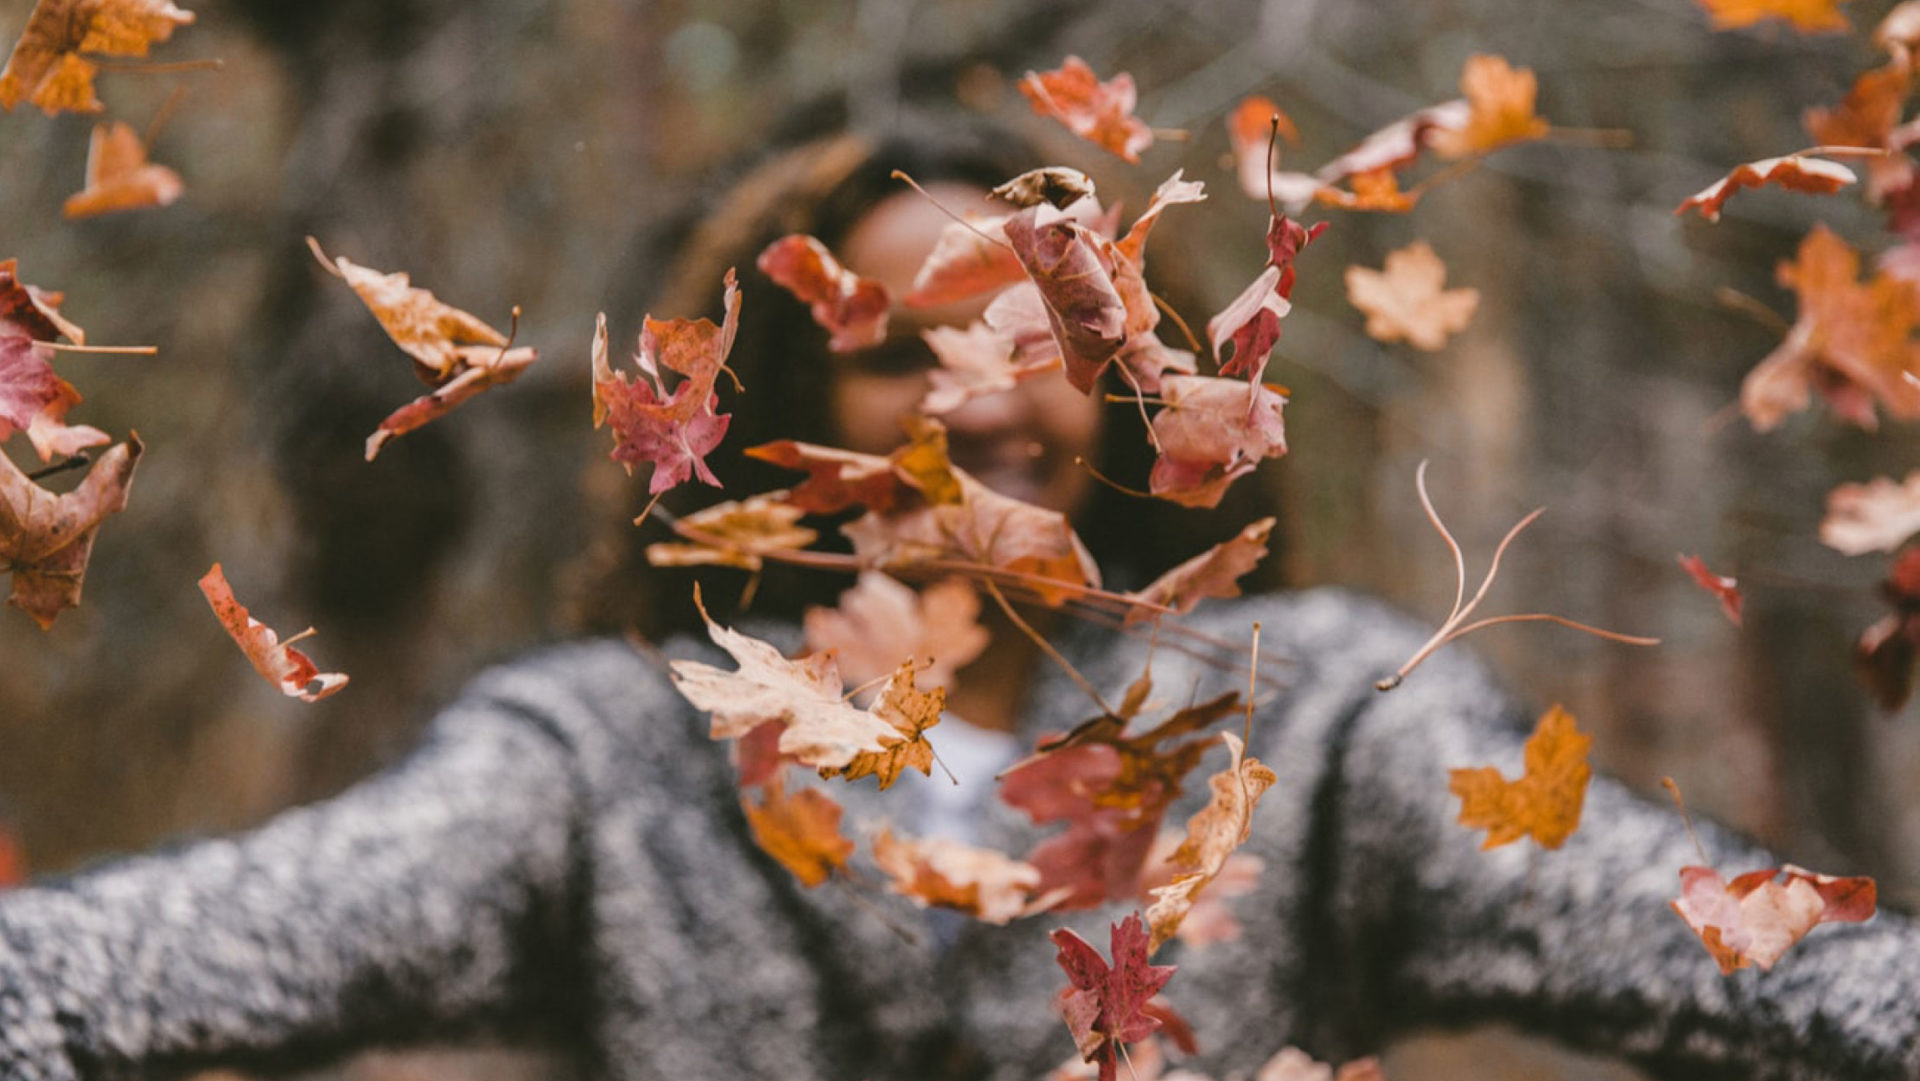 It is easy to fall into sluggish behavior when the cooler weather finally begins to hits us. Instead of hiding inside, try these fun activities from Bustle that will get you outside and enjoying the beautiful fall weather!